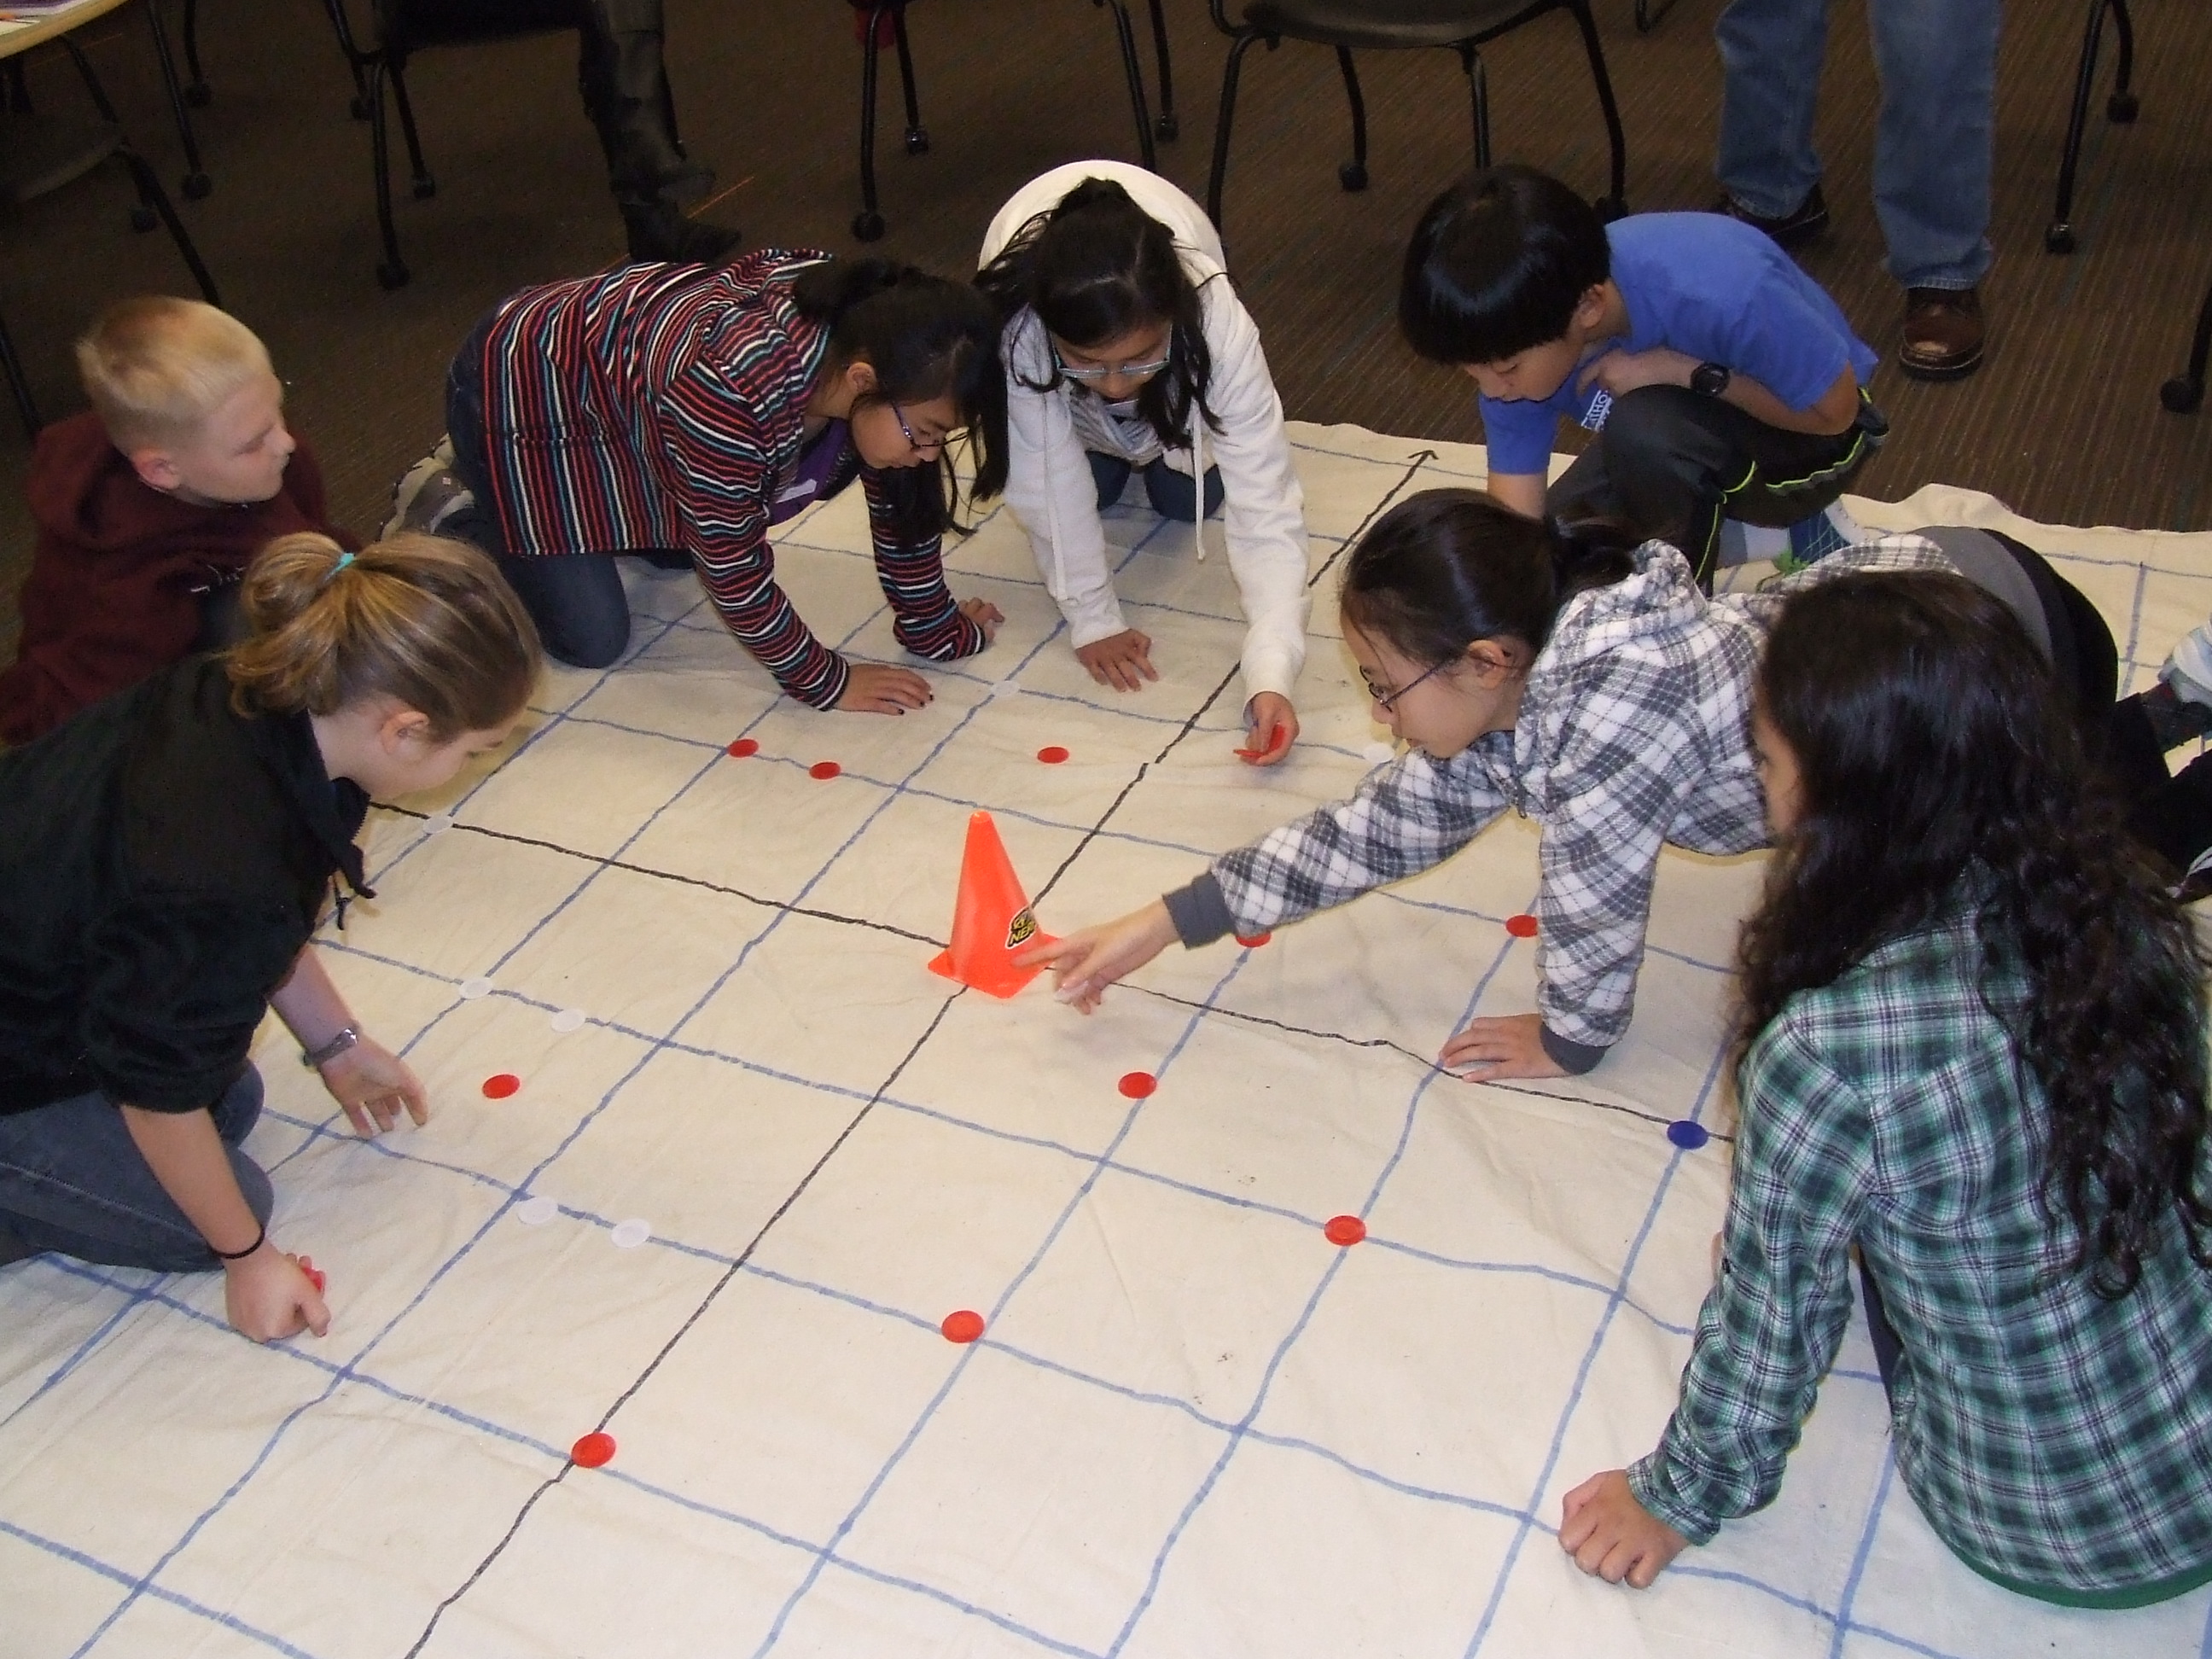 A group of students arranging tokens on a grid